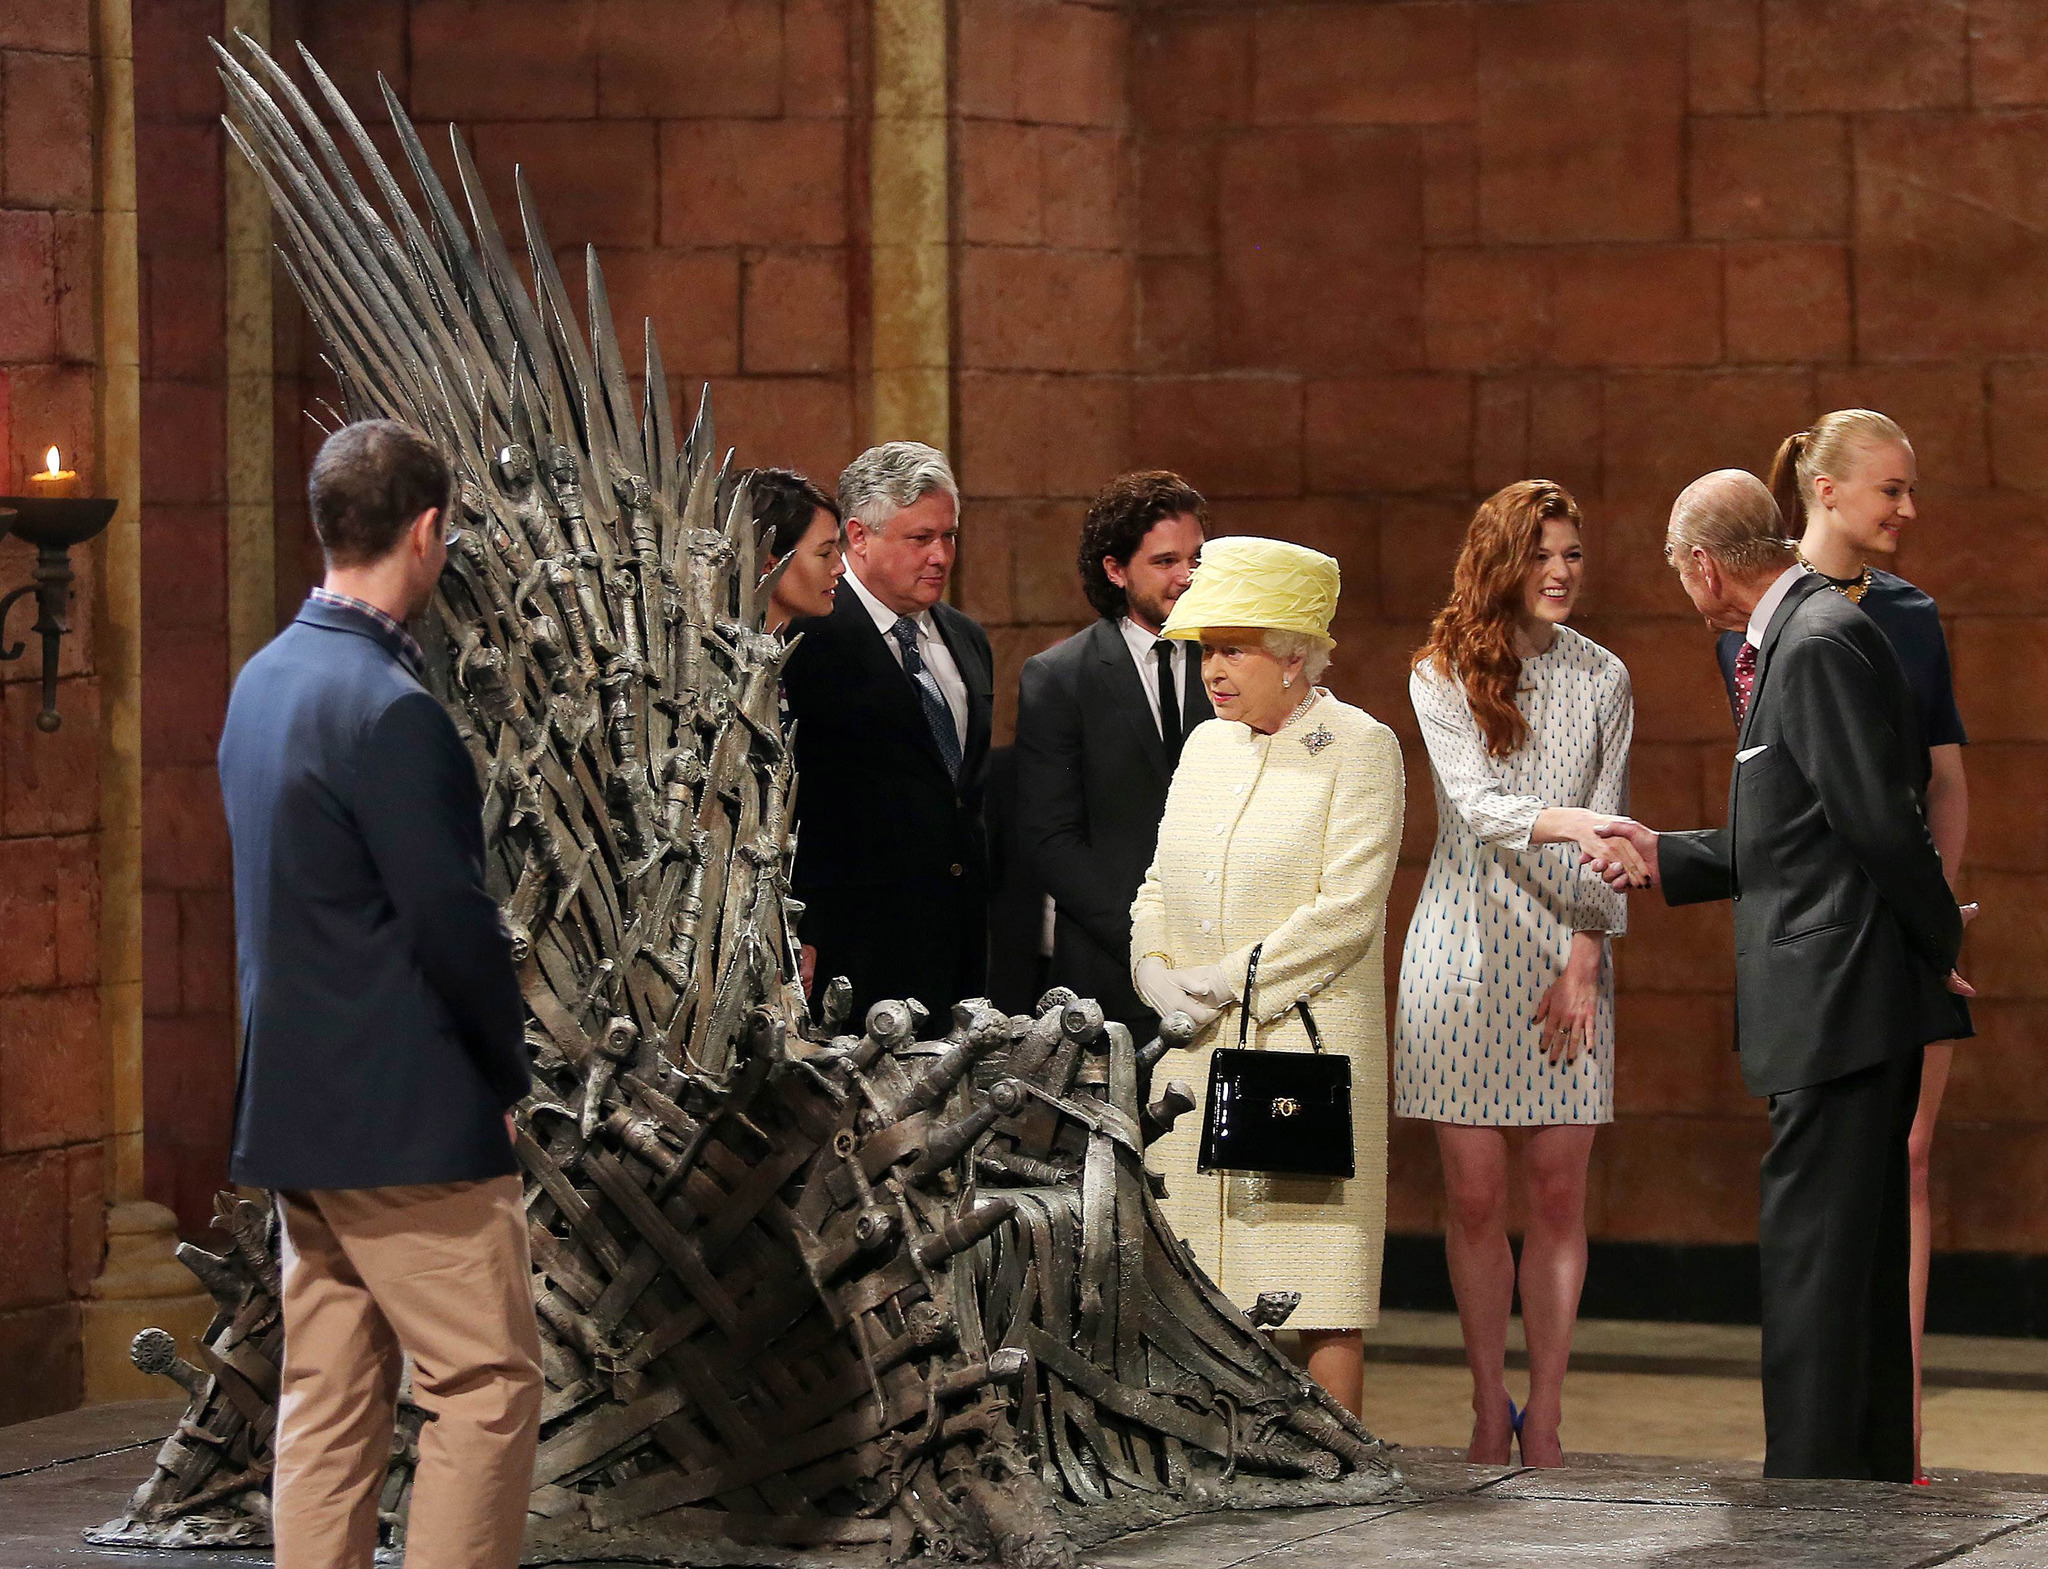 Queen Elizabeth II meets cast members of the HBO TV series 'Game of Thrones' Lena Headey and Conleth Hill while Prince Philip, Duke of Edinburgh shakes hands with Rose Leslie as they views some of the props including the Iron Throne on set in Belfast's Titanic Quarter on June 24, 2014 in Belfast, Northern Ireland.